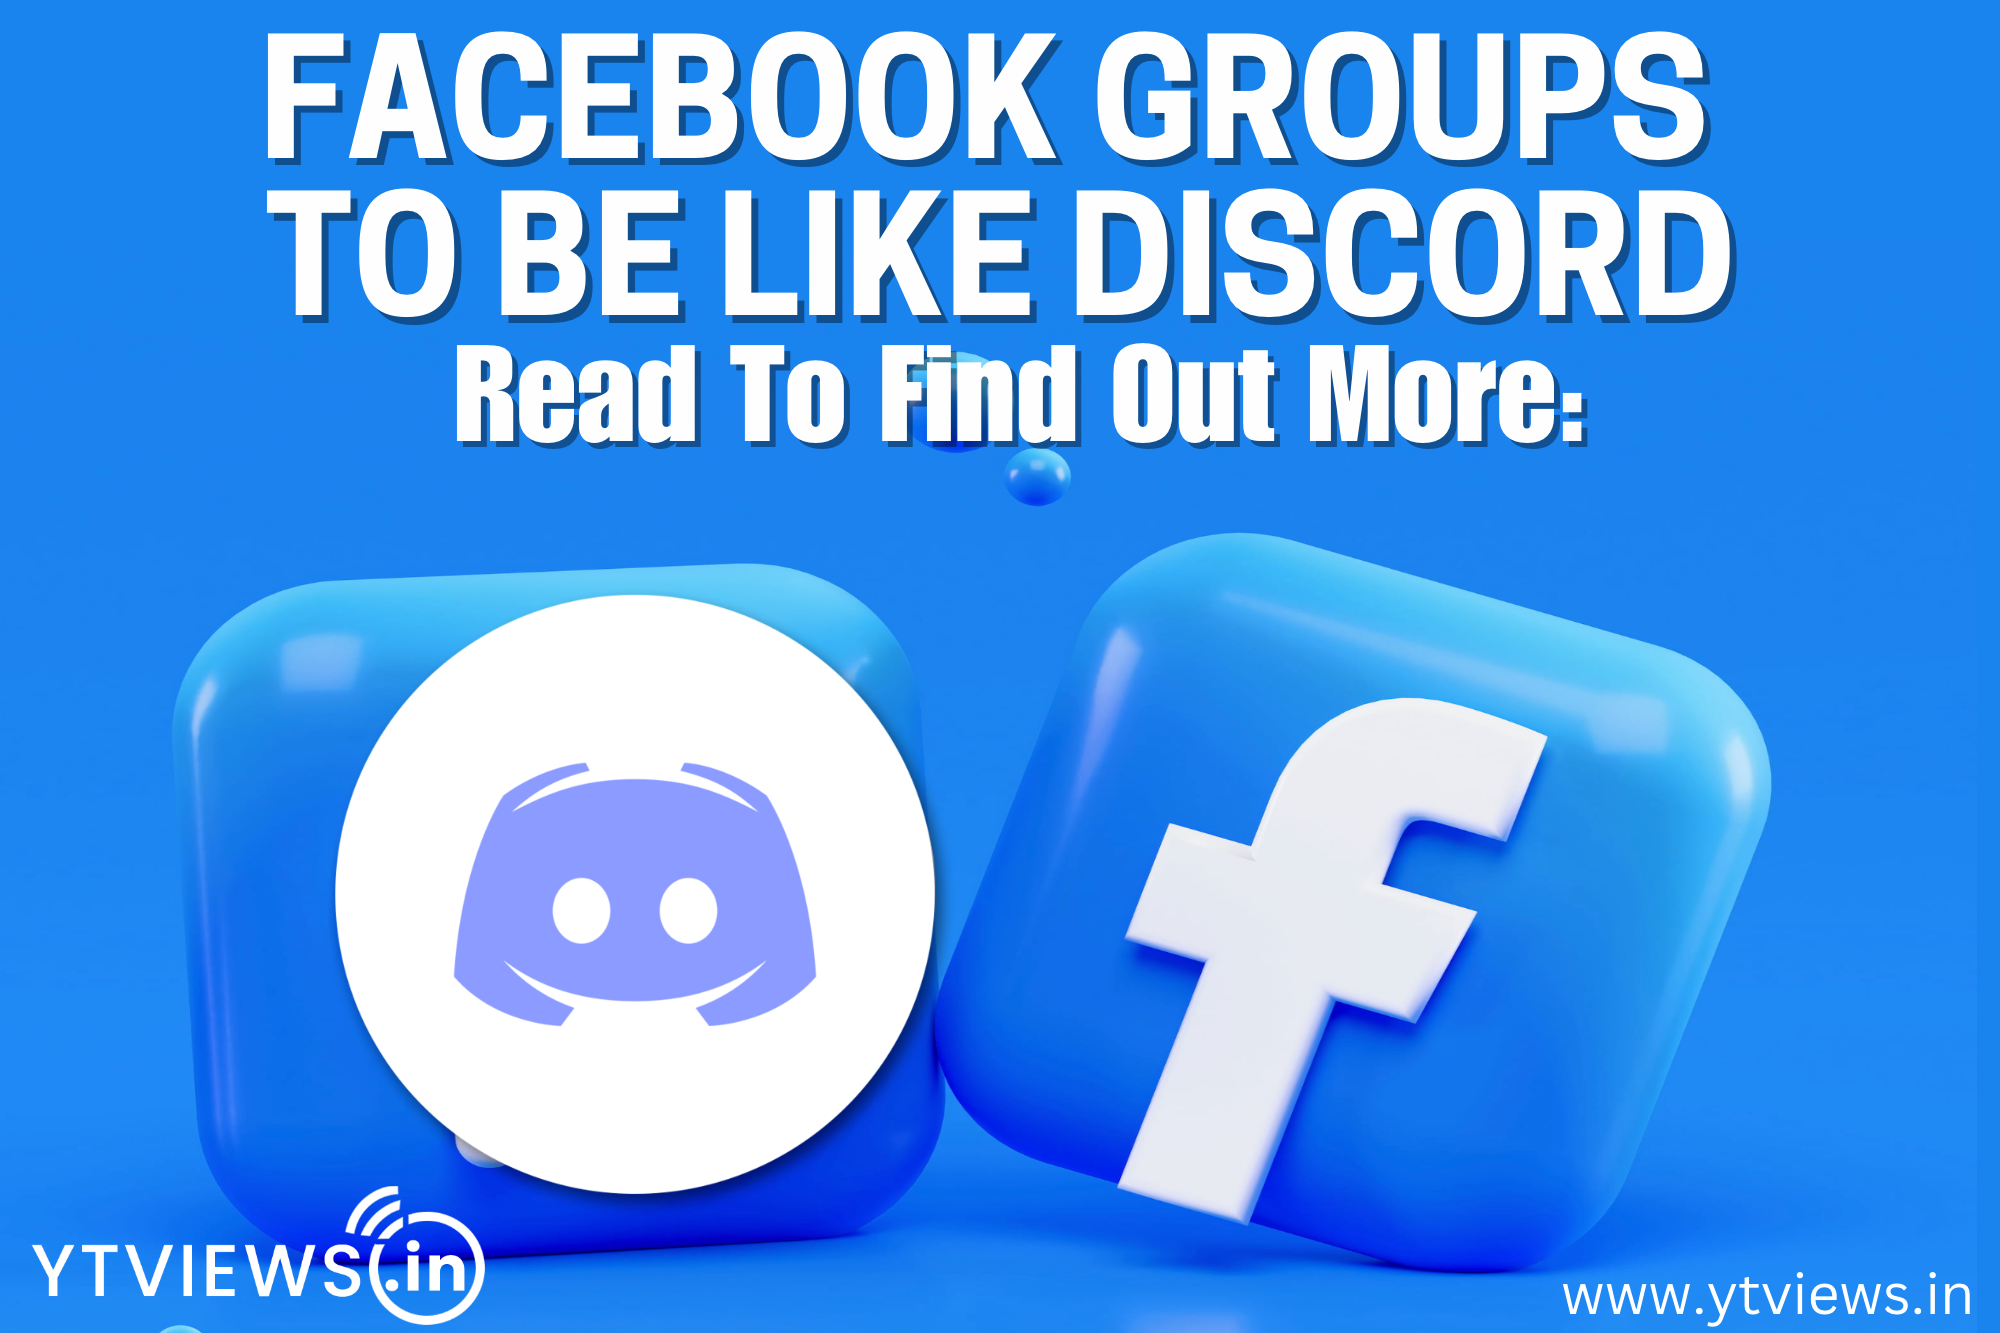 Facebook Groups To Be Like Discord: Read To Find Out More